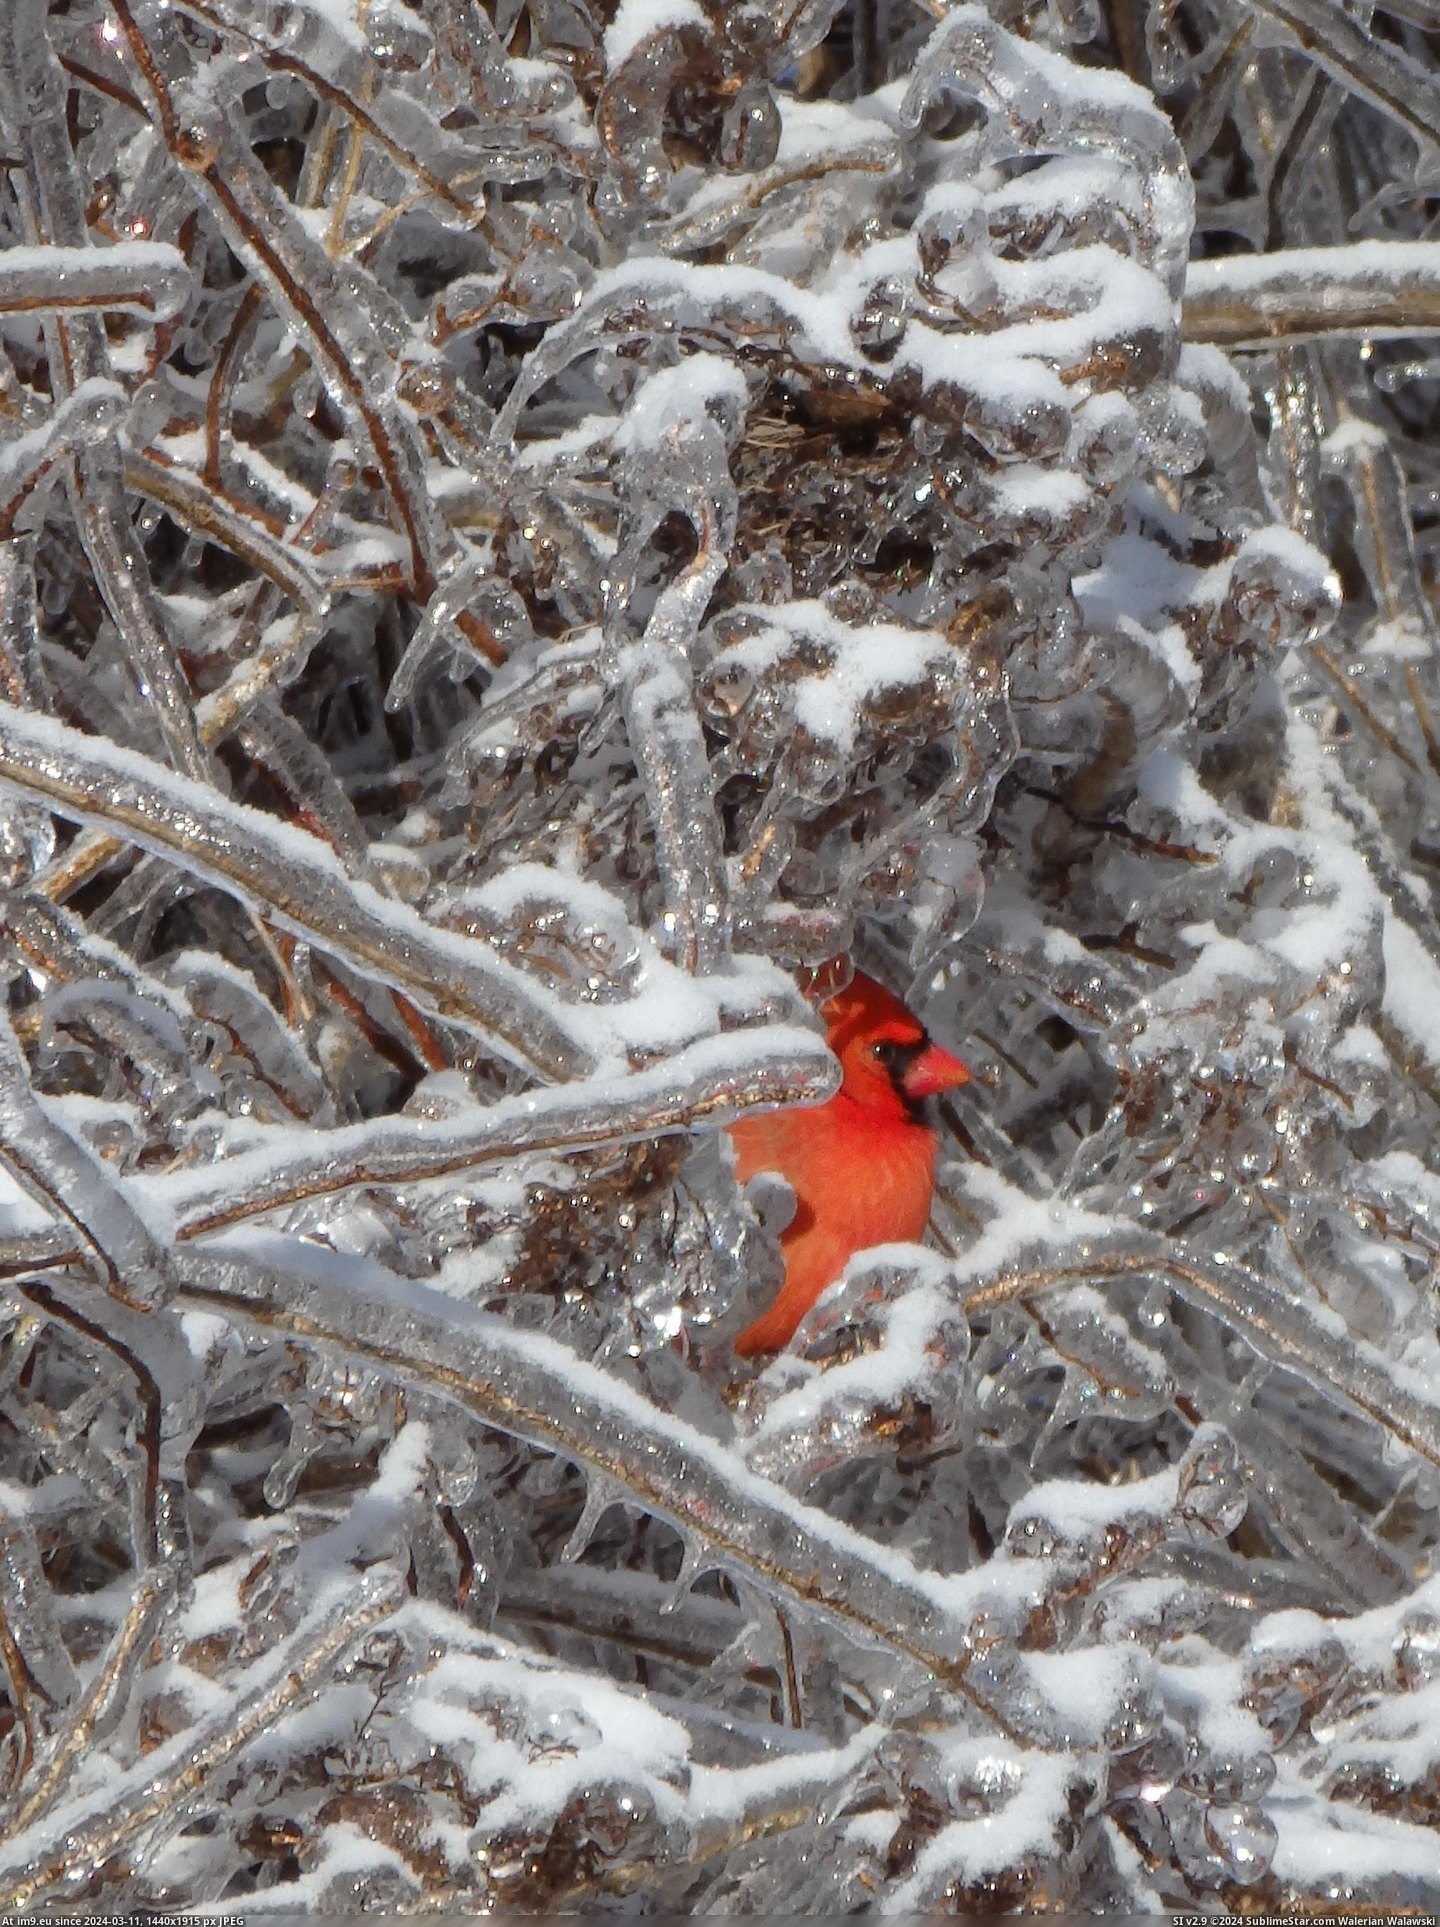 #Ice #Appeared #Cardinal #Storm [Pics] After the ice storm, a cardinal appeared (OC) Pic. (Image of album My r/PICS favs))